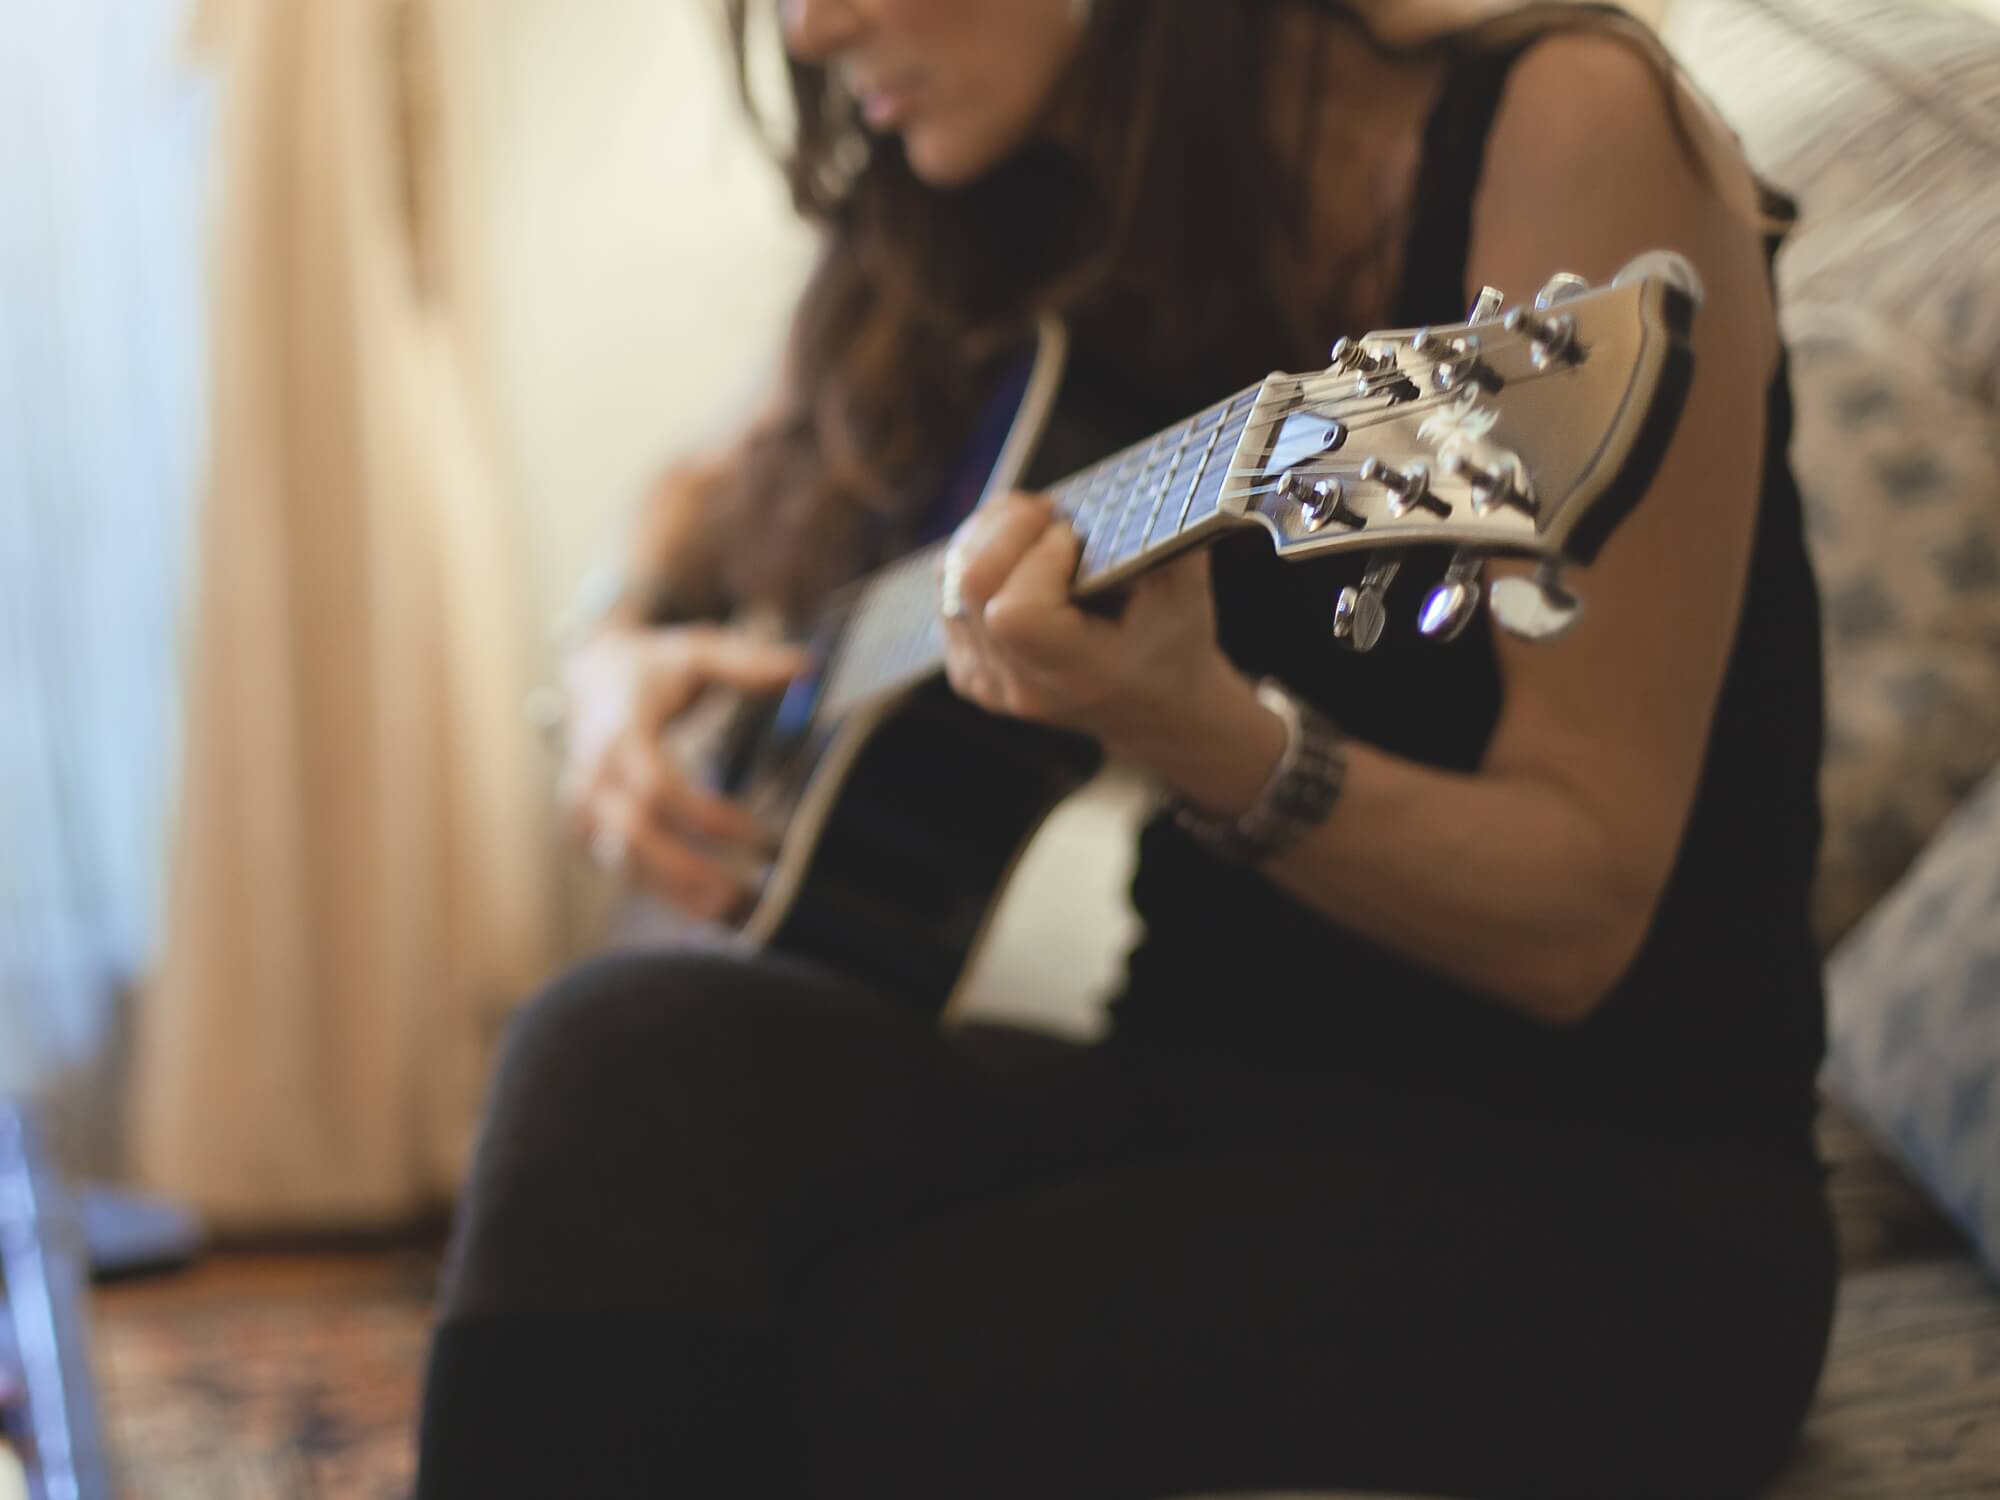 Woman playing a guitar